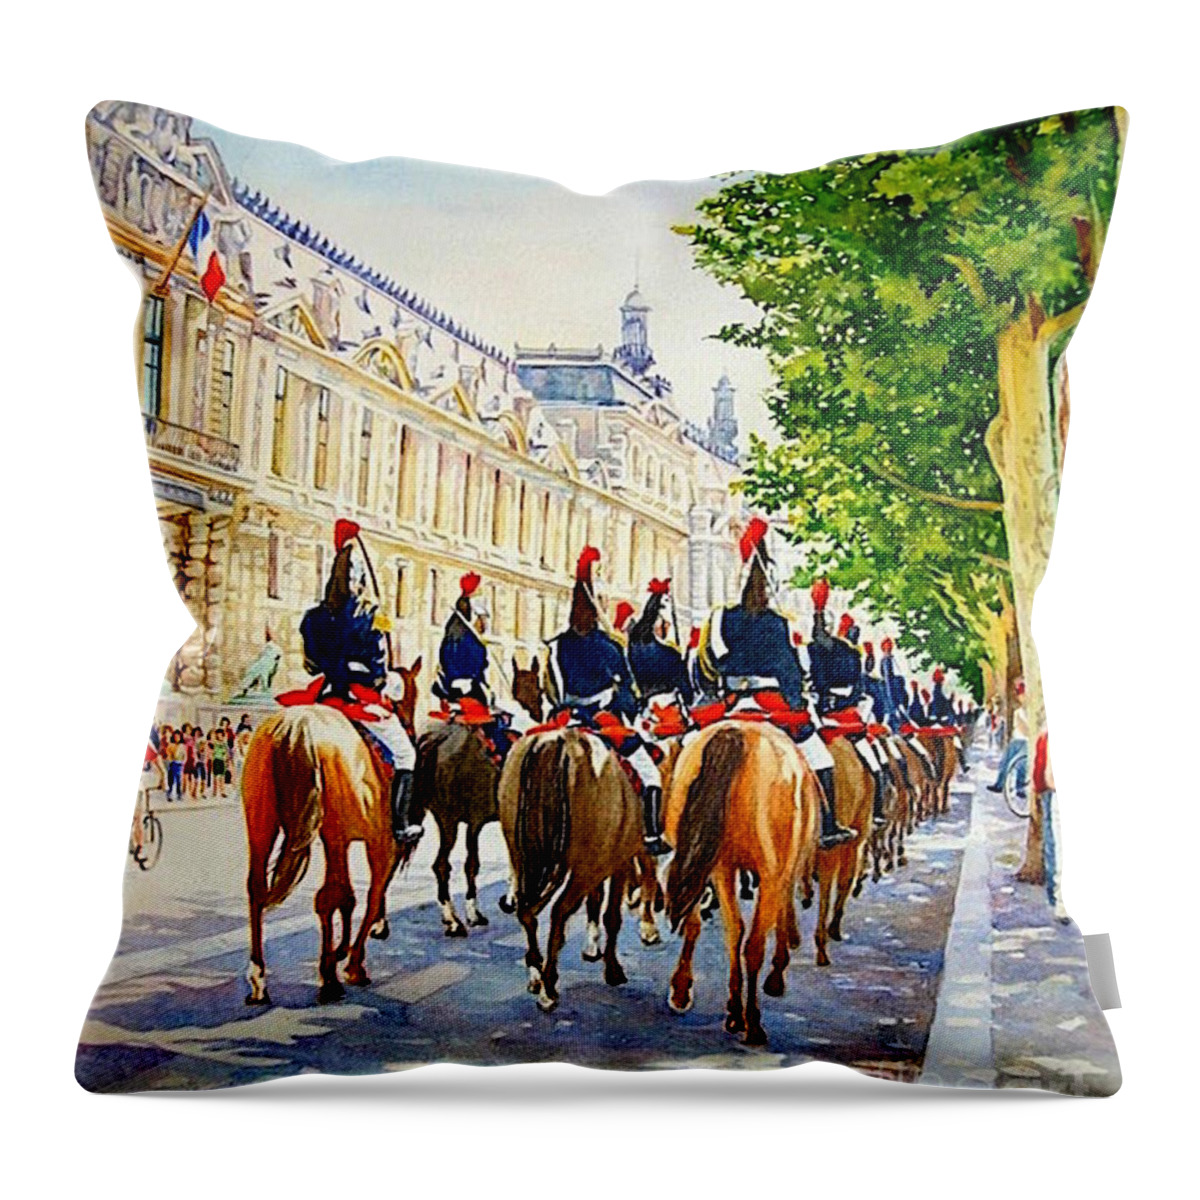 Paris Throw Pillow featuring the painting 14 Juillet - Garde Nationale - Paris - France by Francoise Chauray